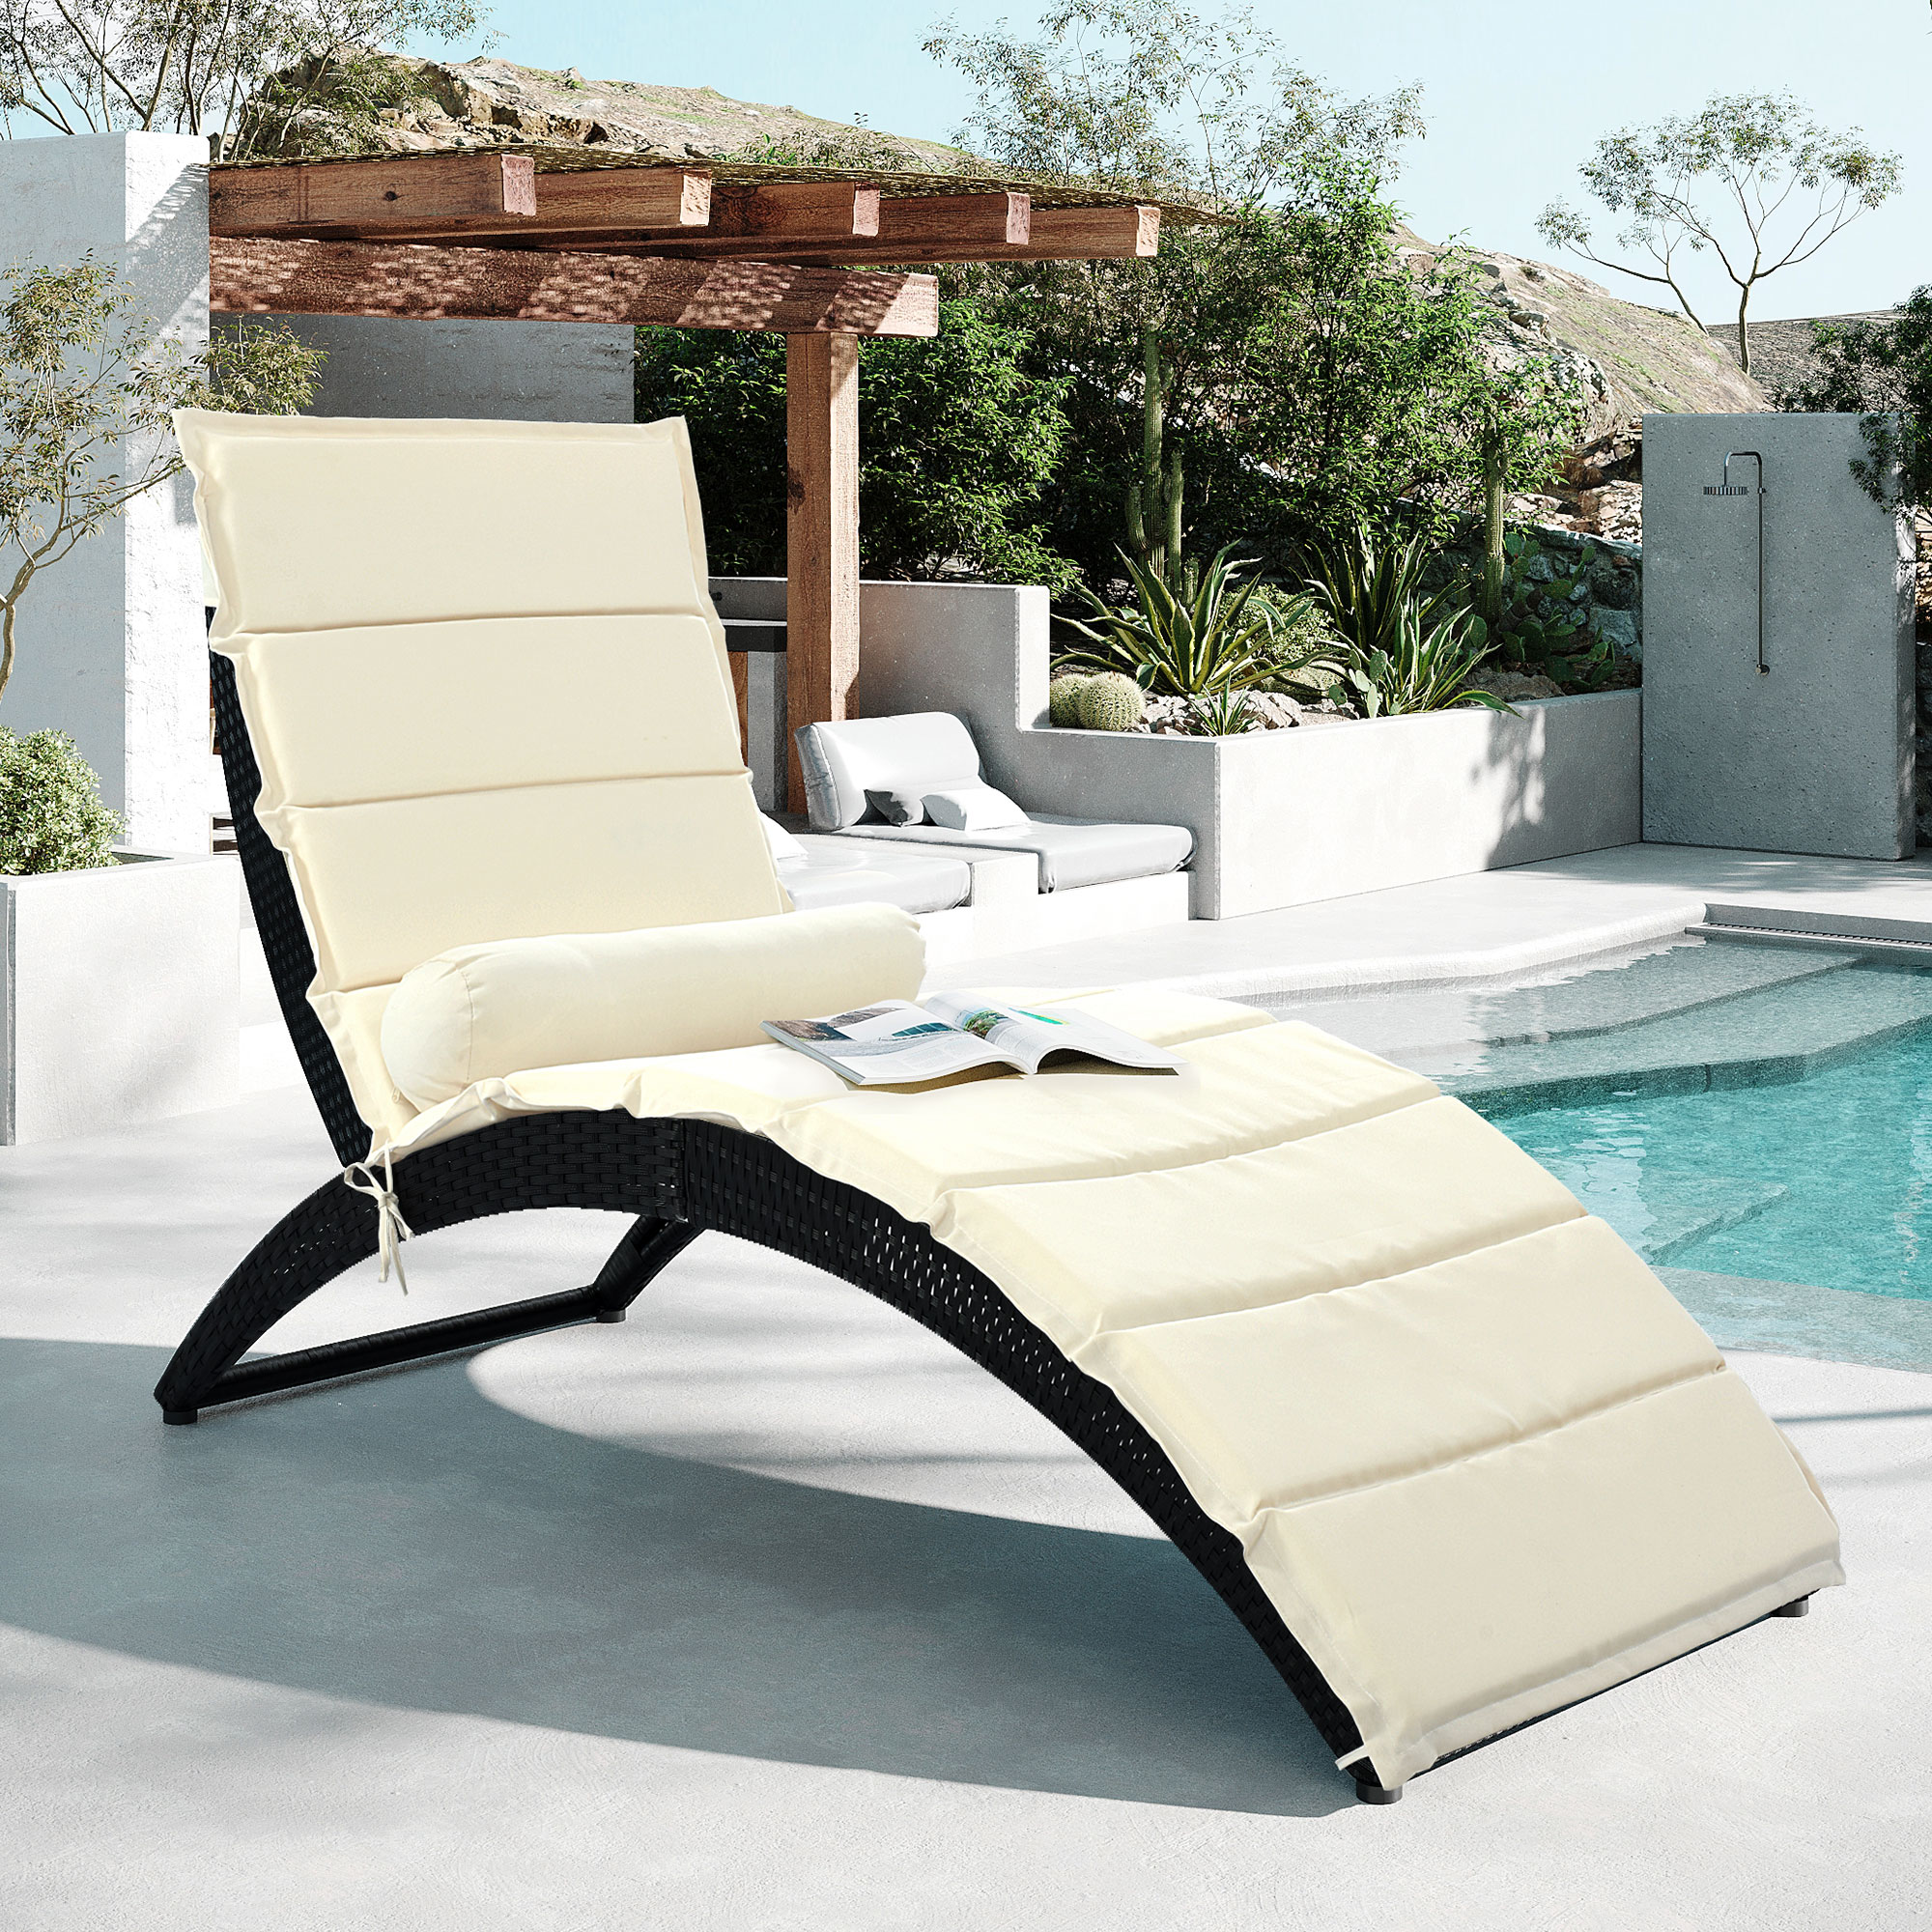 Patio Wicker Sun Lounger, PE Rattan Foldable Chaise Lounger with Removable Cushion and Bolster Pillow, Black Wicker and Beige Cushion-Boyel Living